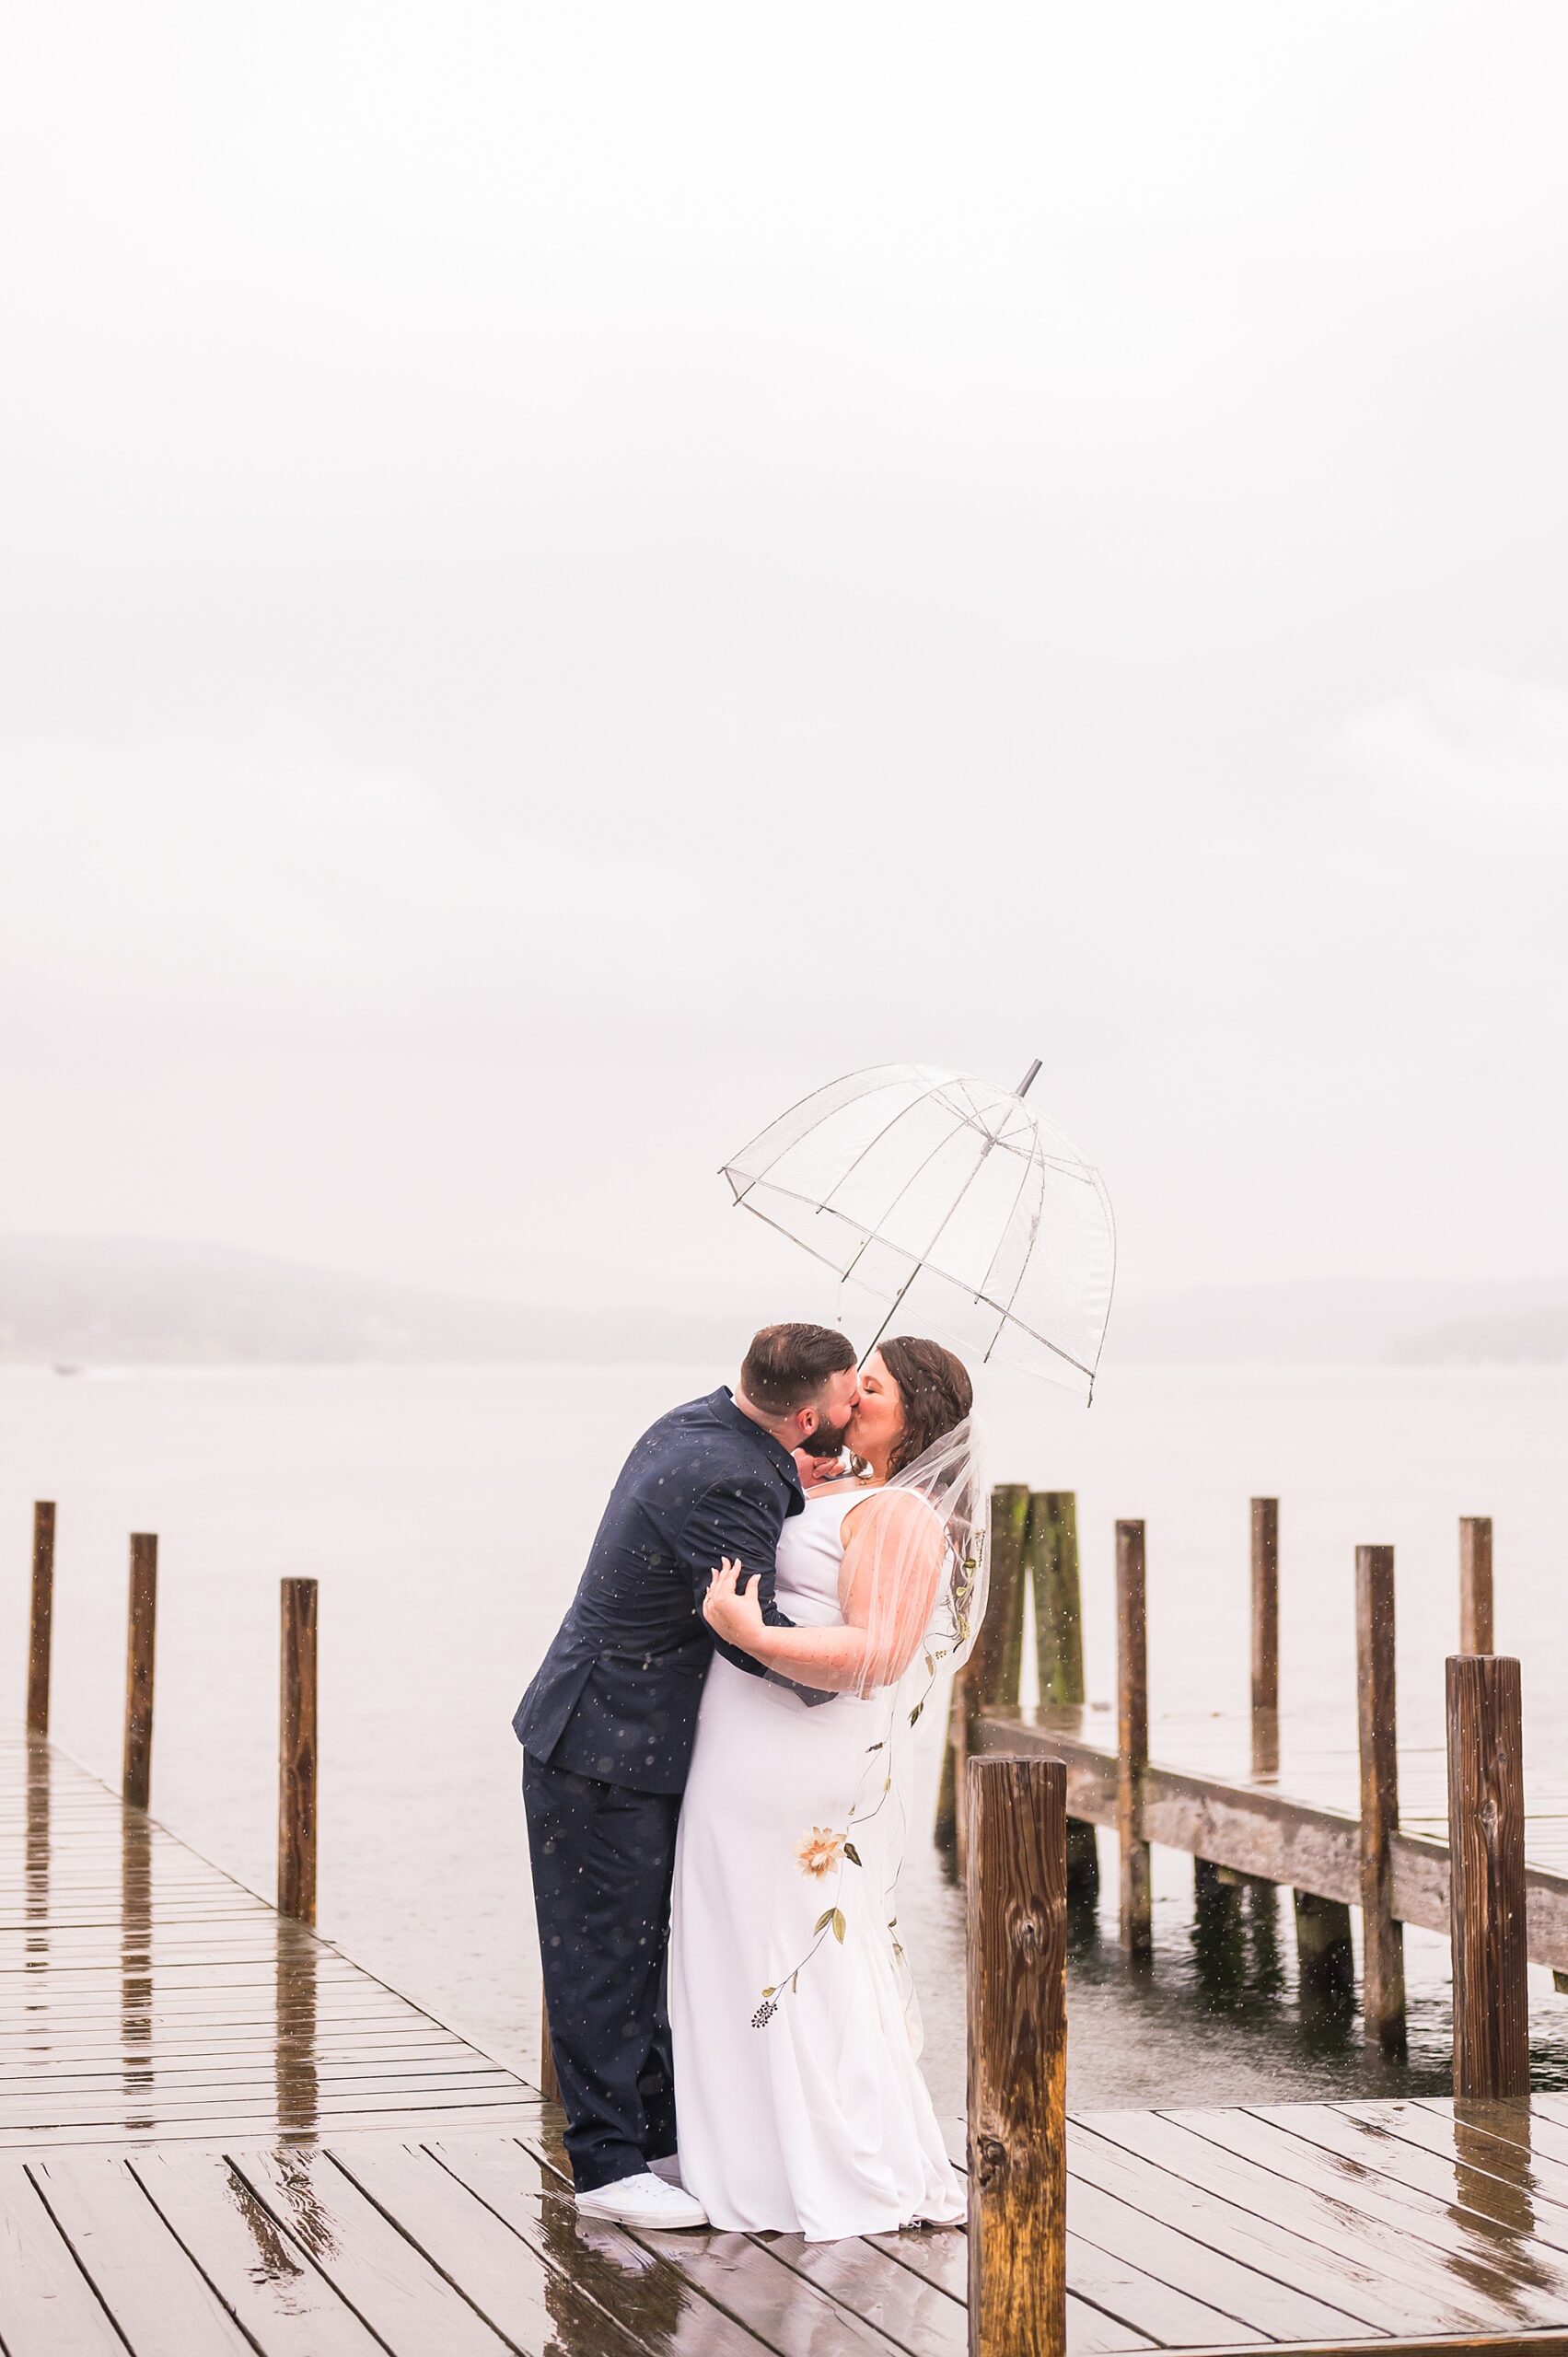 romantic wedding portraits in the rain from Waterfront Wedding at The Margate